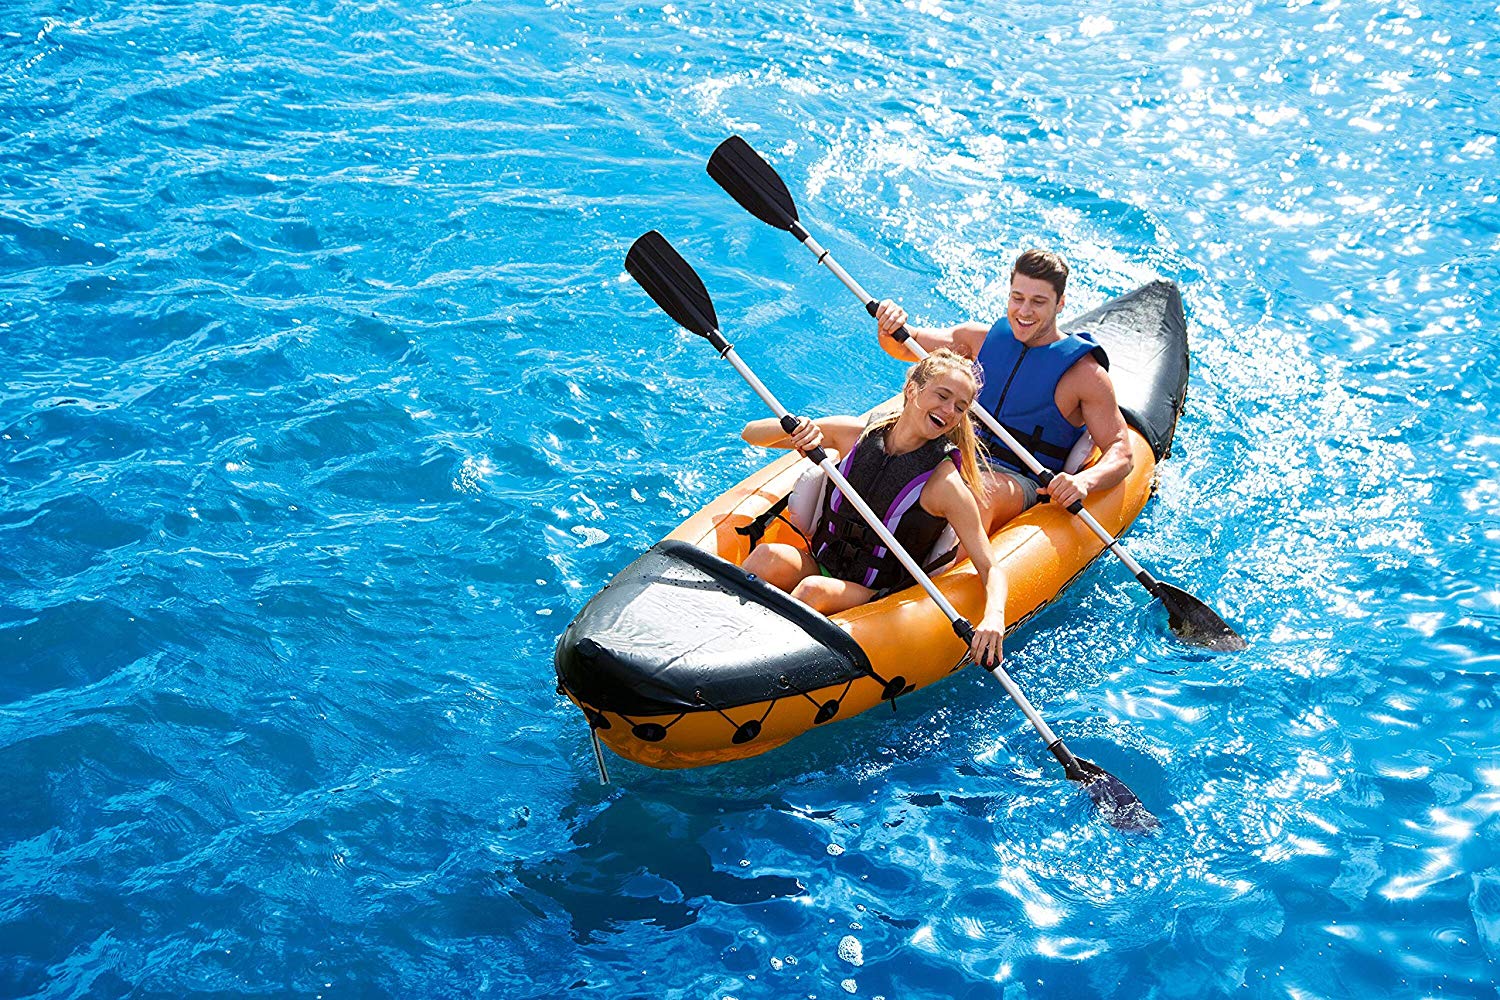 Bestway Inflatable Two-Person Kayak incl. Oars